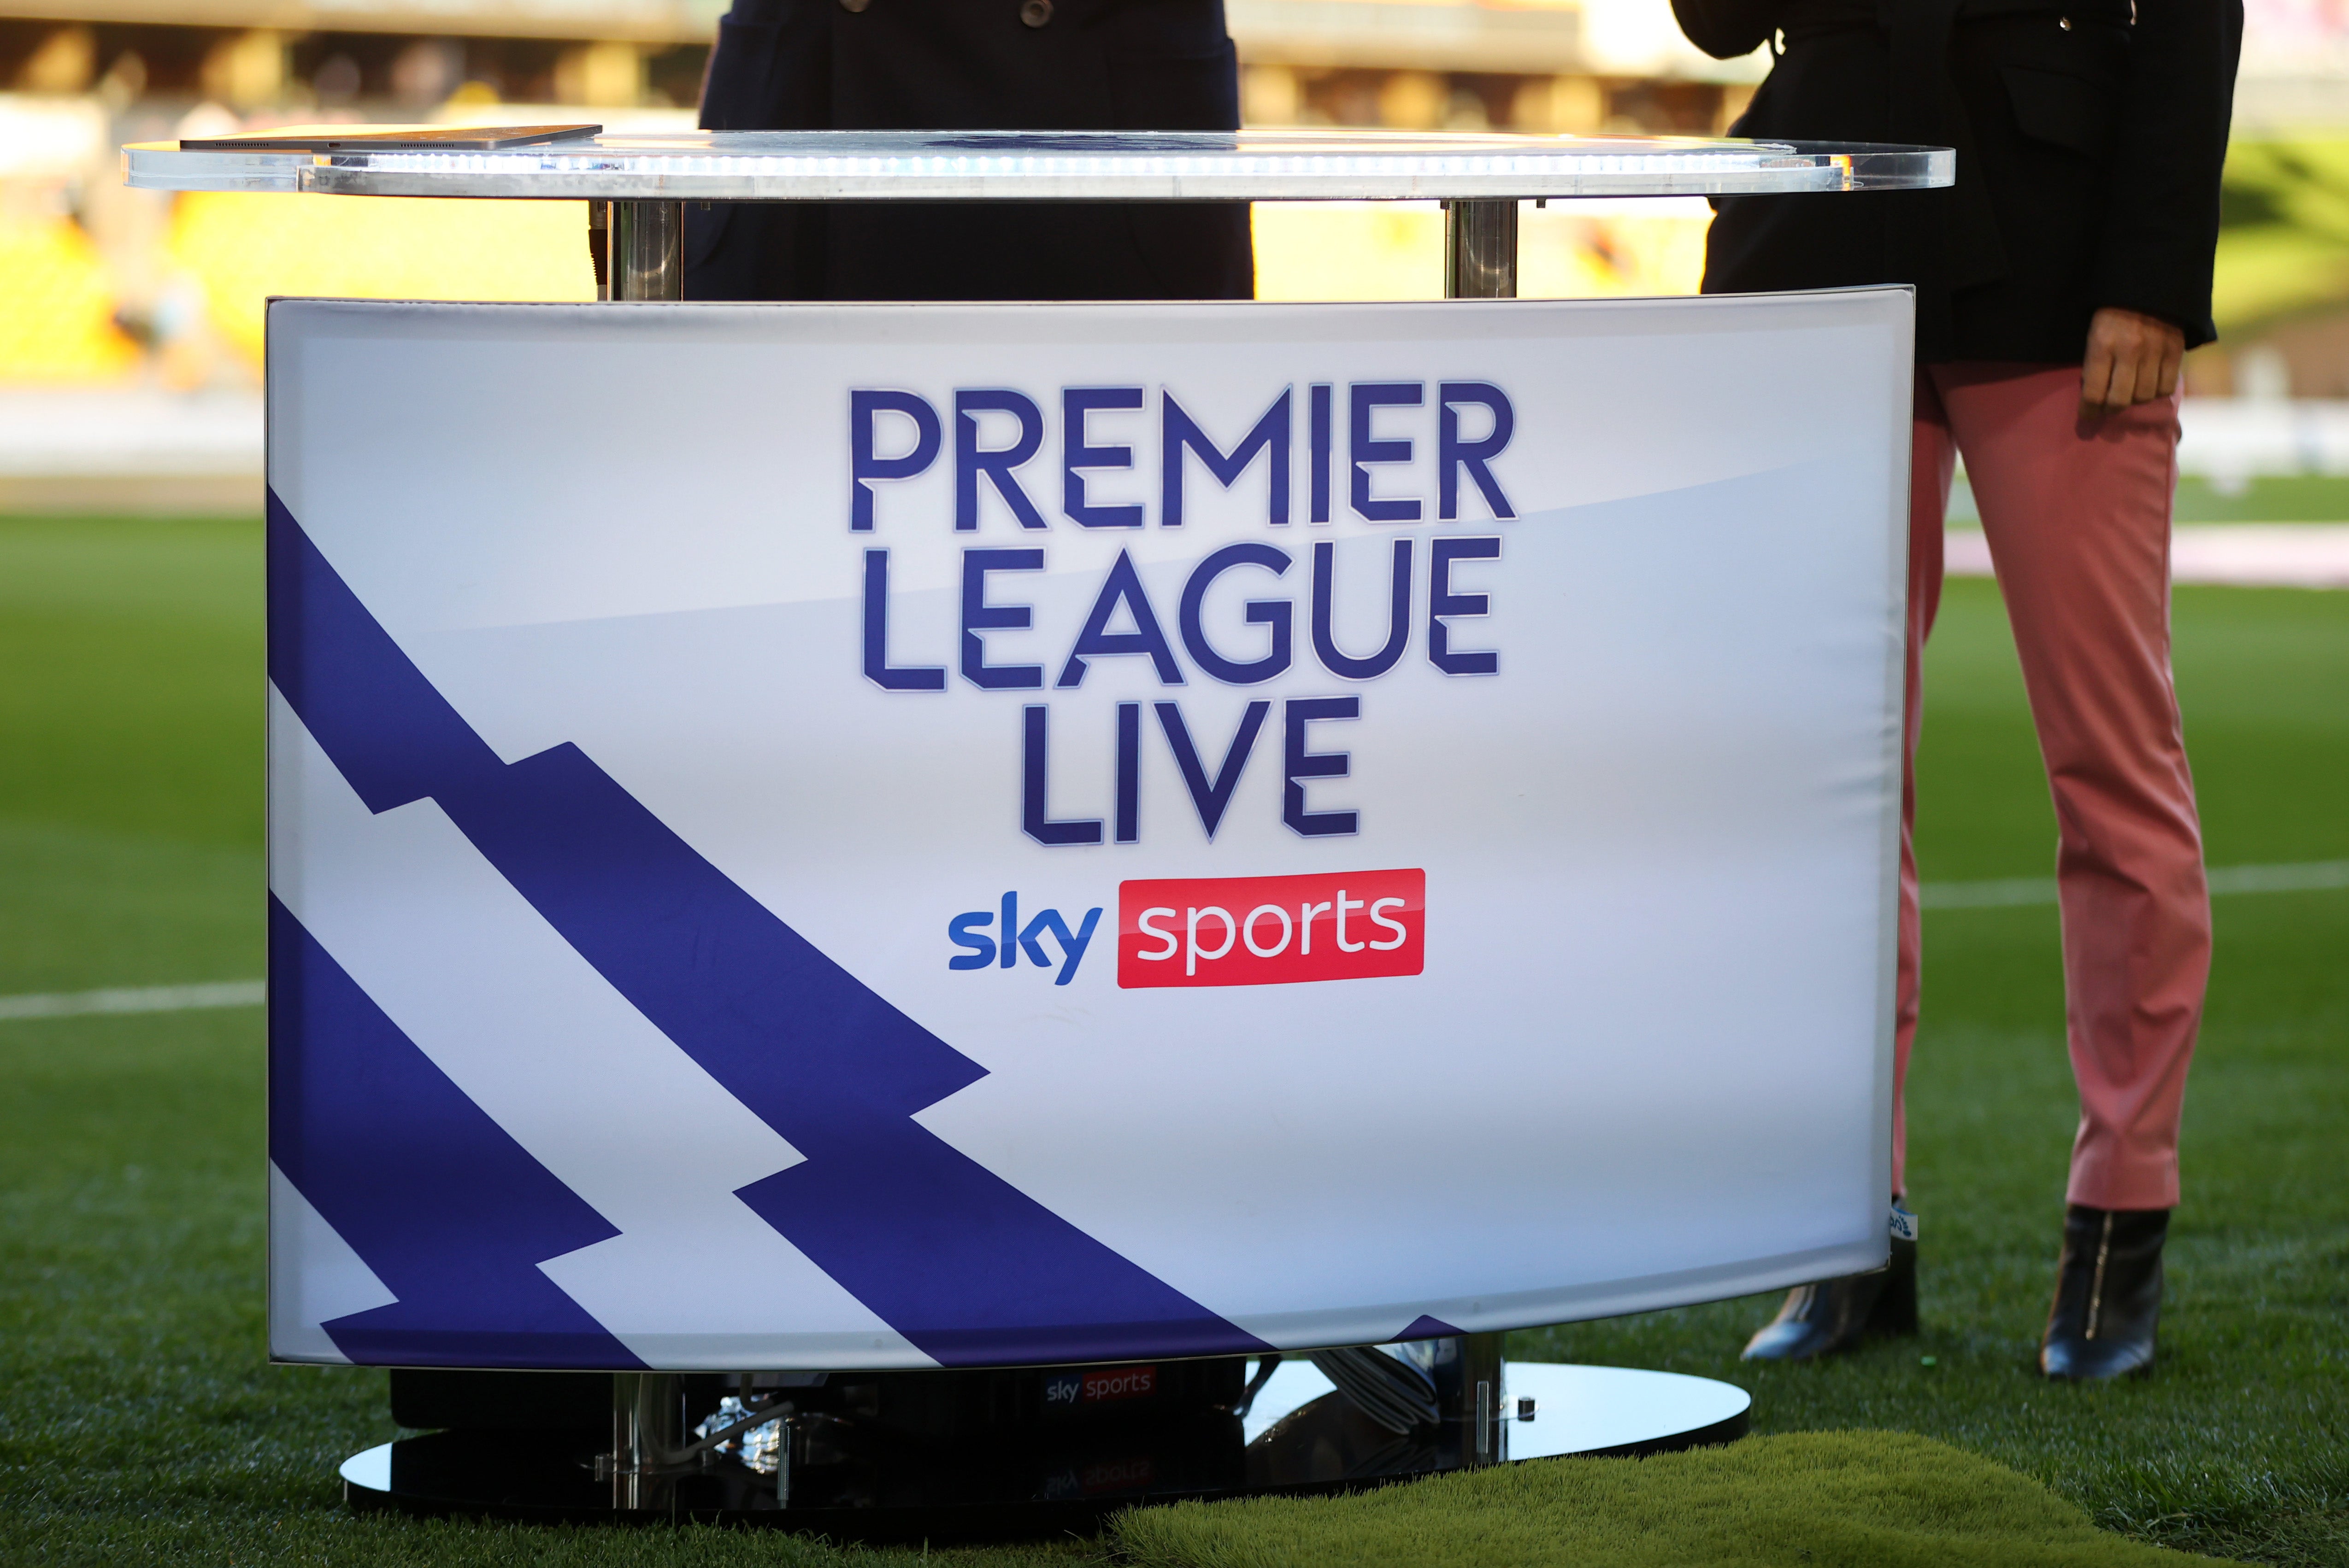 Sky Sports continues to lead UK coverage of the Premier League